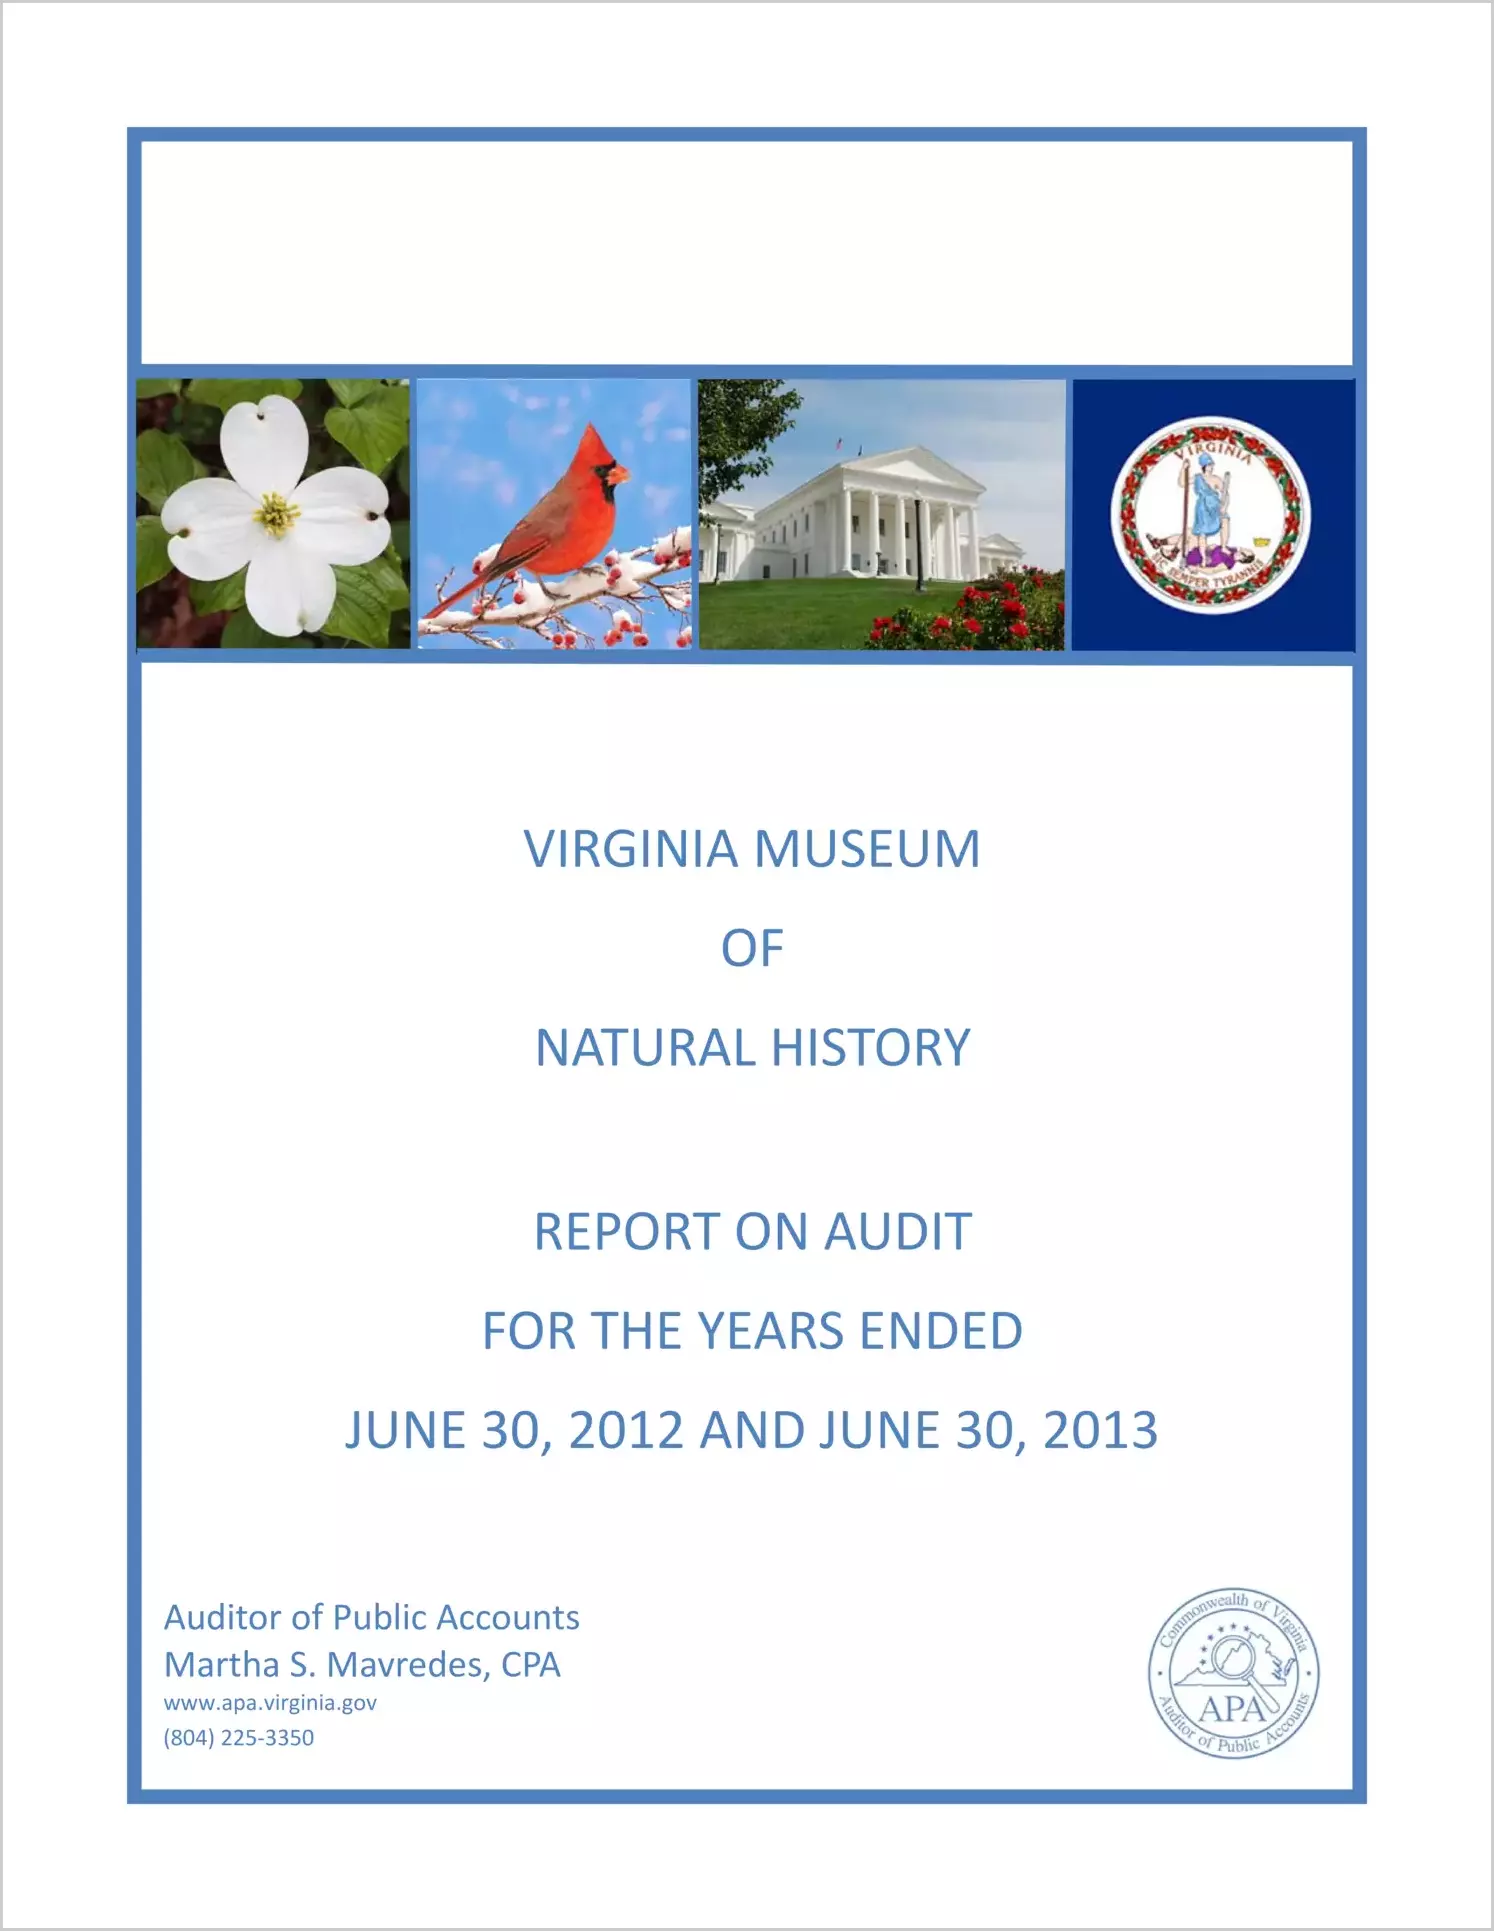 Virginia Museum Of Natural History - For the Year Ended June 30, 2012 and June 30, 2013